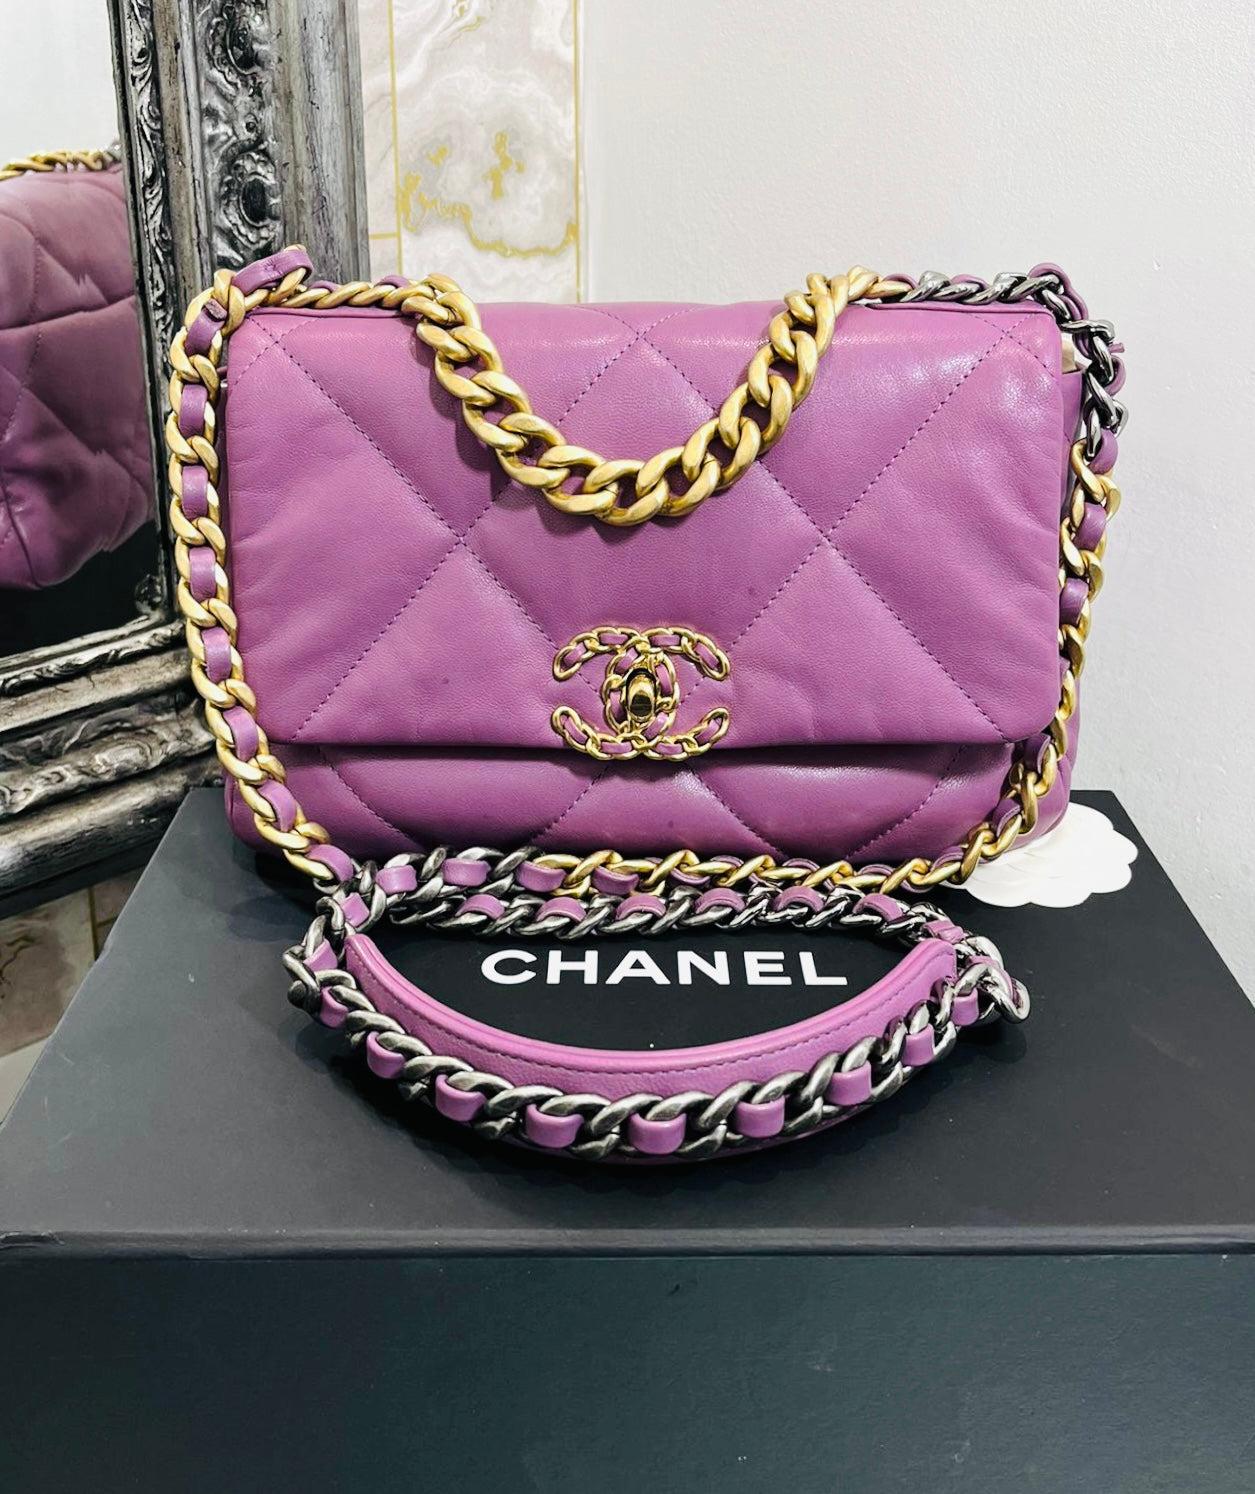 Chanel 19 Leather Flap Bag For Sale 4